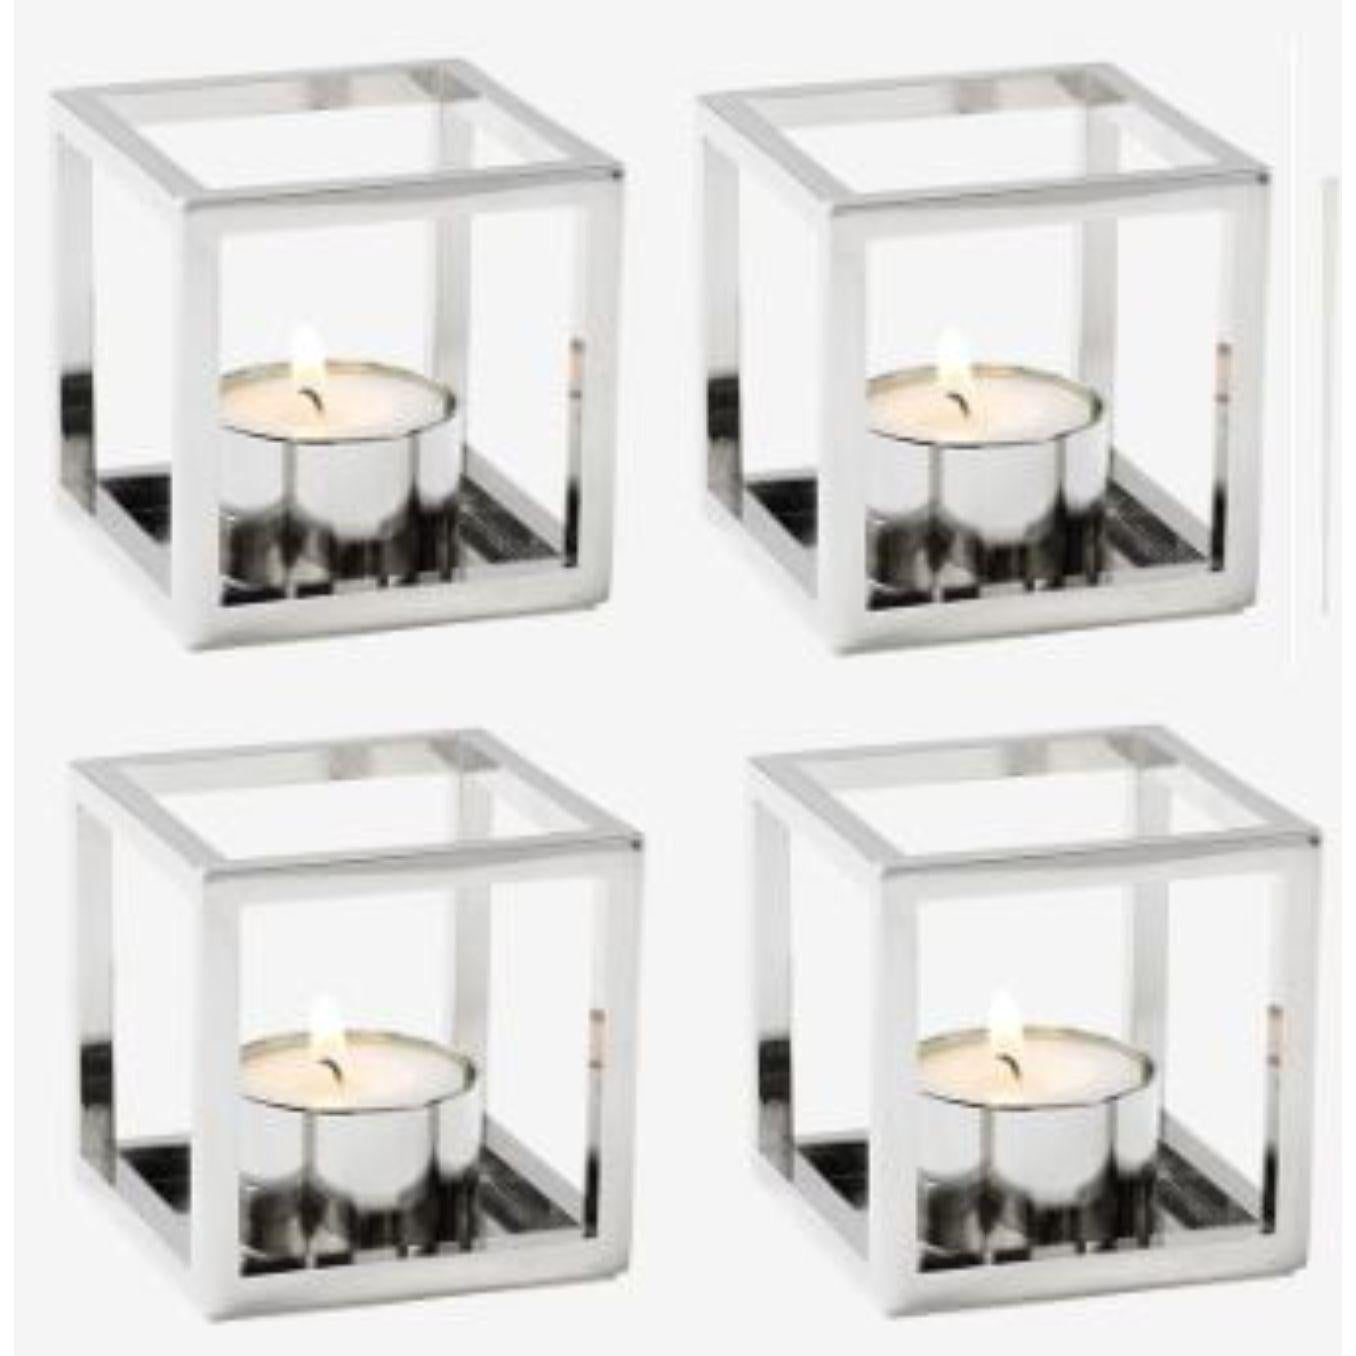 Set of 4 nickel plated Kubus T candle holders by Lassen
Dimensions: D 7 x W 7 x H 7 cm 
Materials: Metal 
Also available in different dimensions and colors. 
Weight: 0.40 Kg

The tealight, Kubus T, is added to the Kubus collection in 2018,